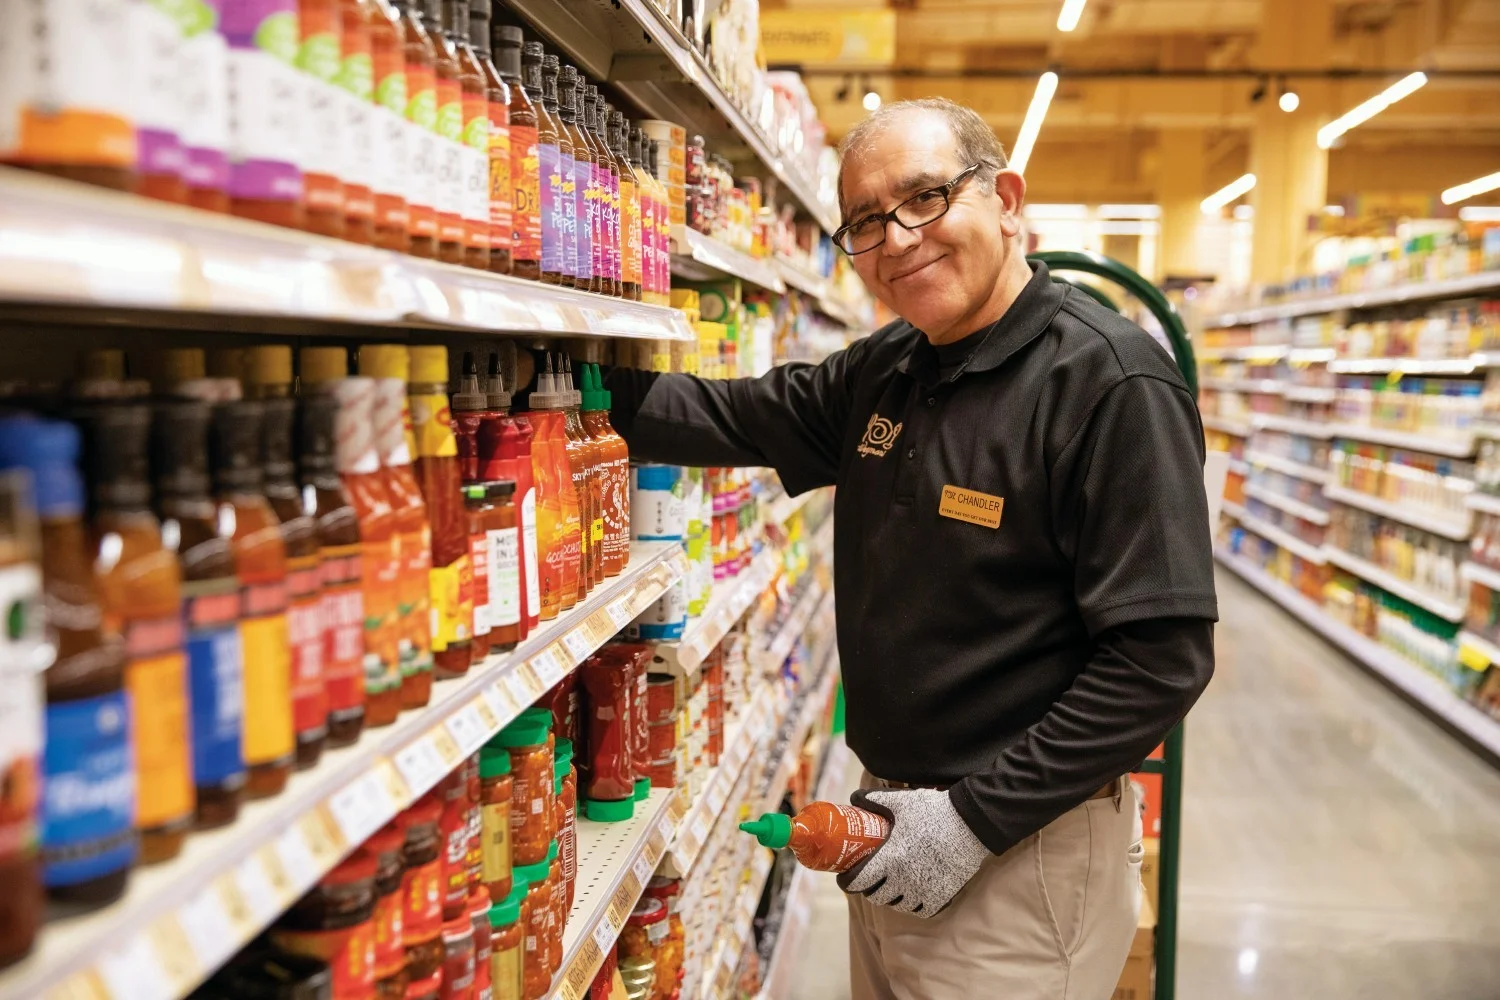  An employee at Wegman's Food Markets, one of the Fortune Best Workplaces in Retail, stocks the shelves.